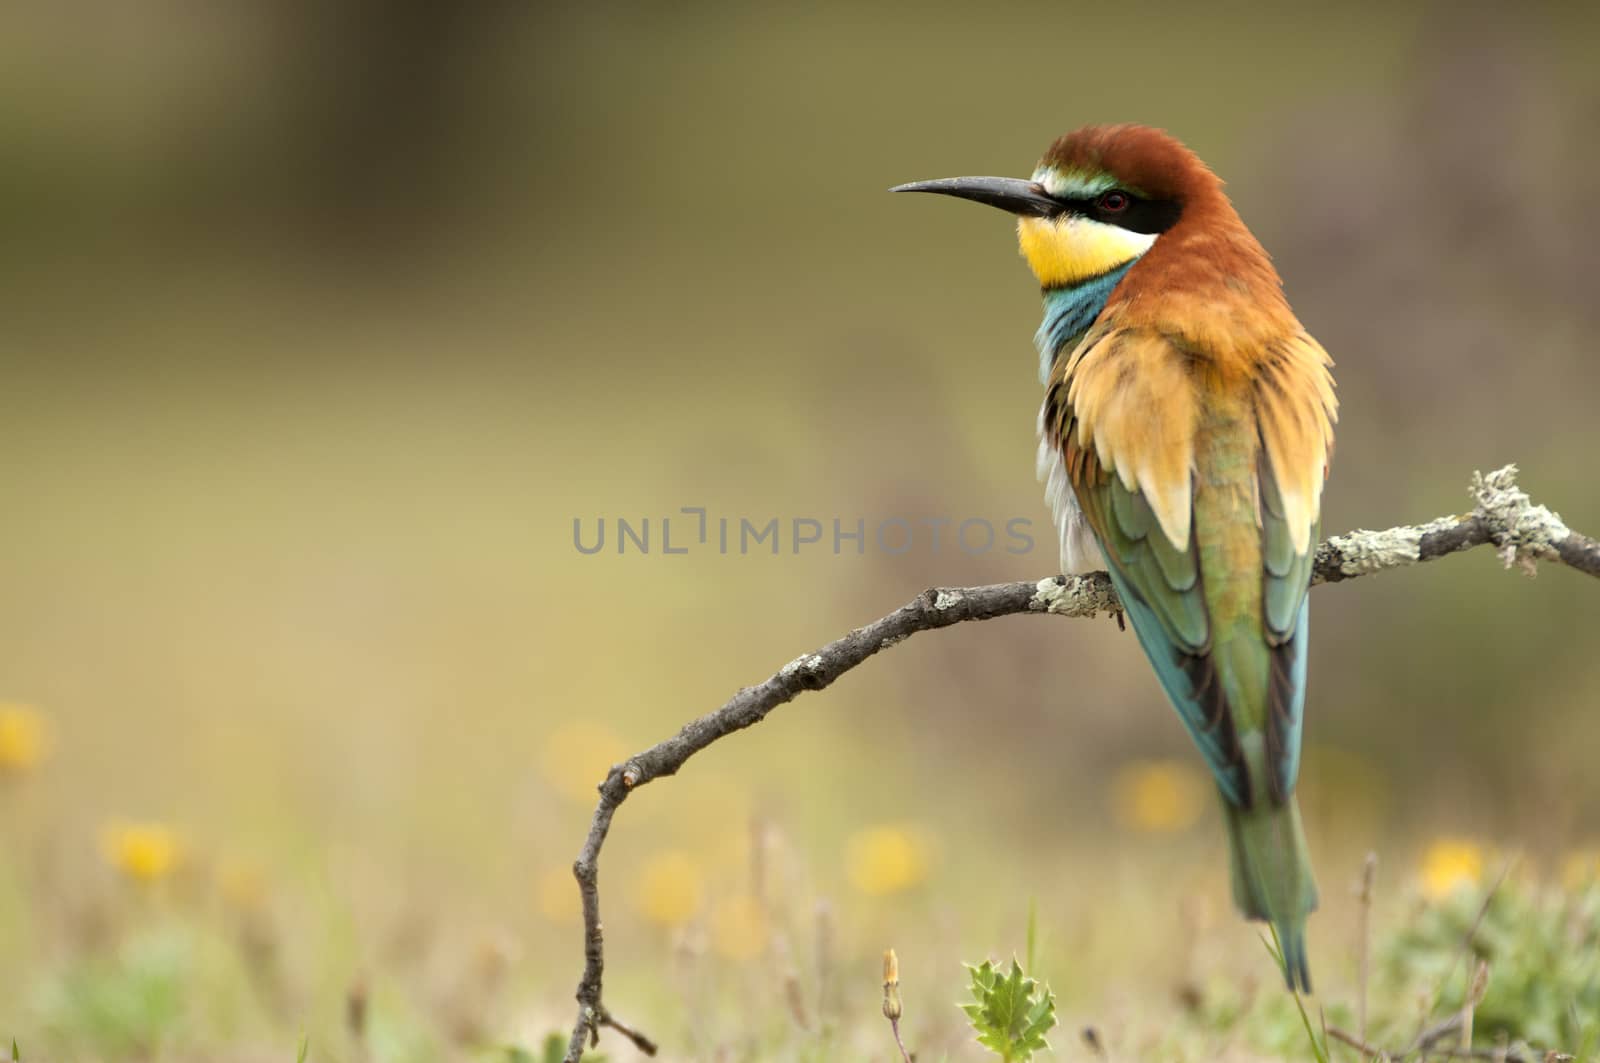 European bee-eater (Merops apiaster), perched on a branch with a dragonfly